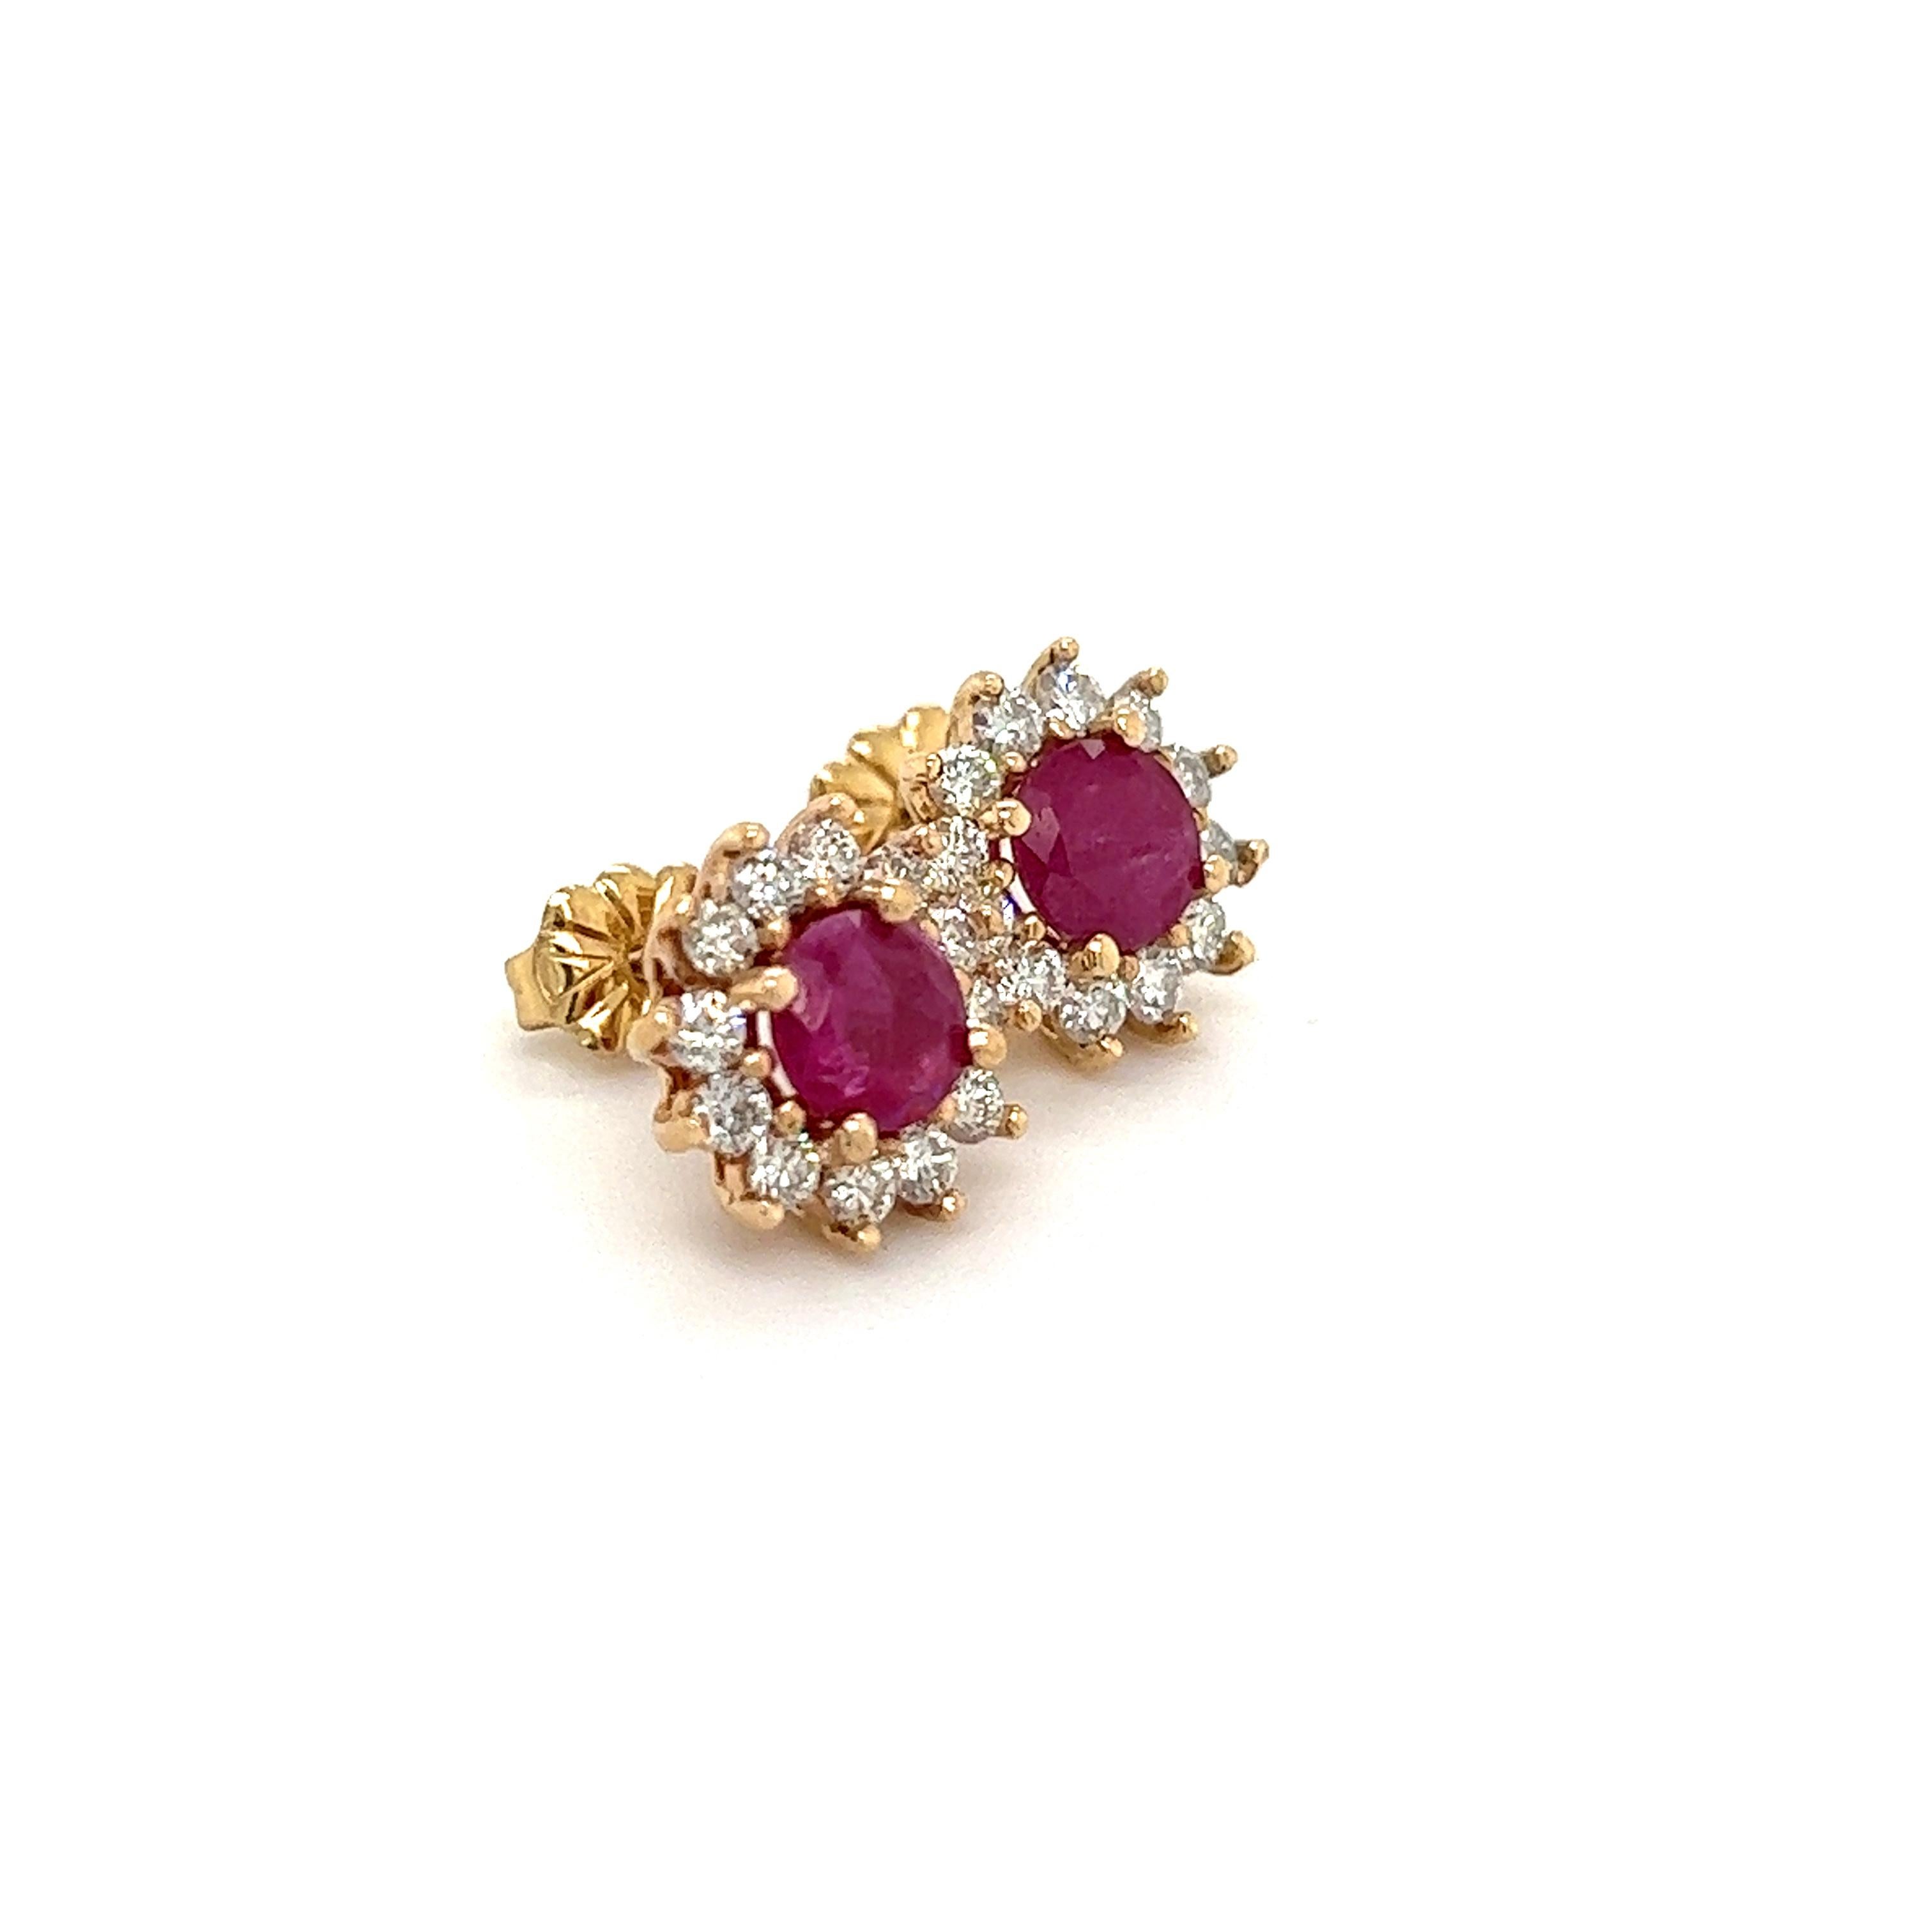 Round Cut Natural Ruby Diamond Earrings 14k Yellow Gold 2.20 TCW Certified For Sale